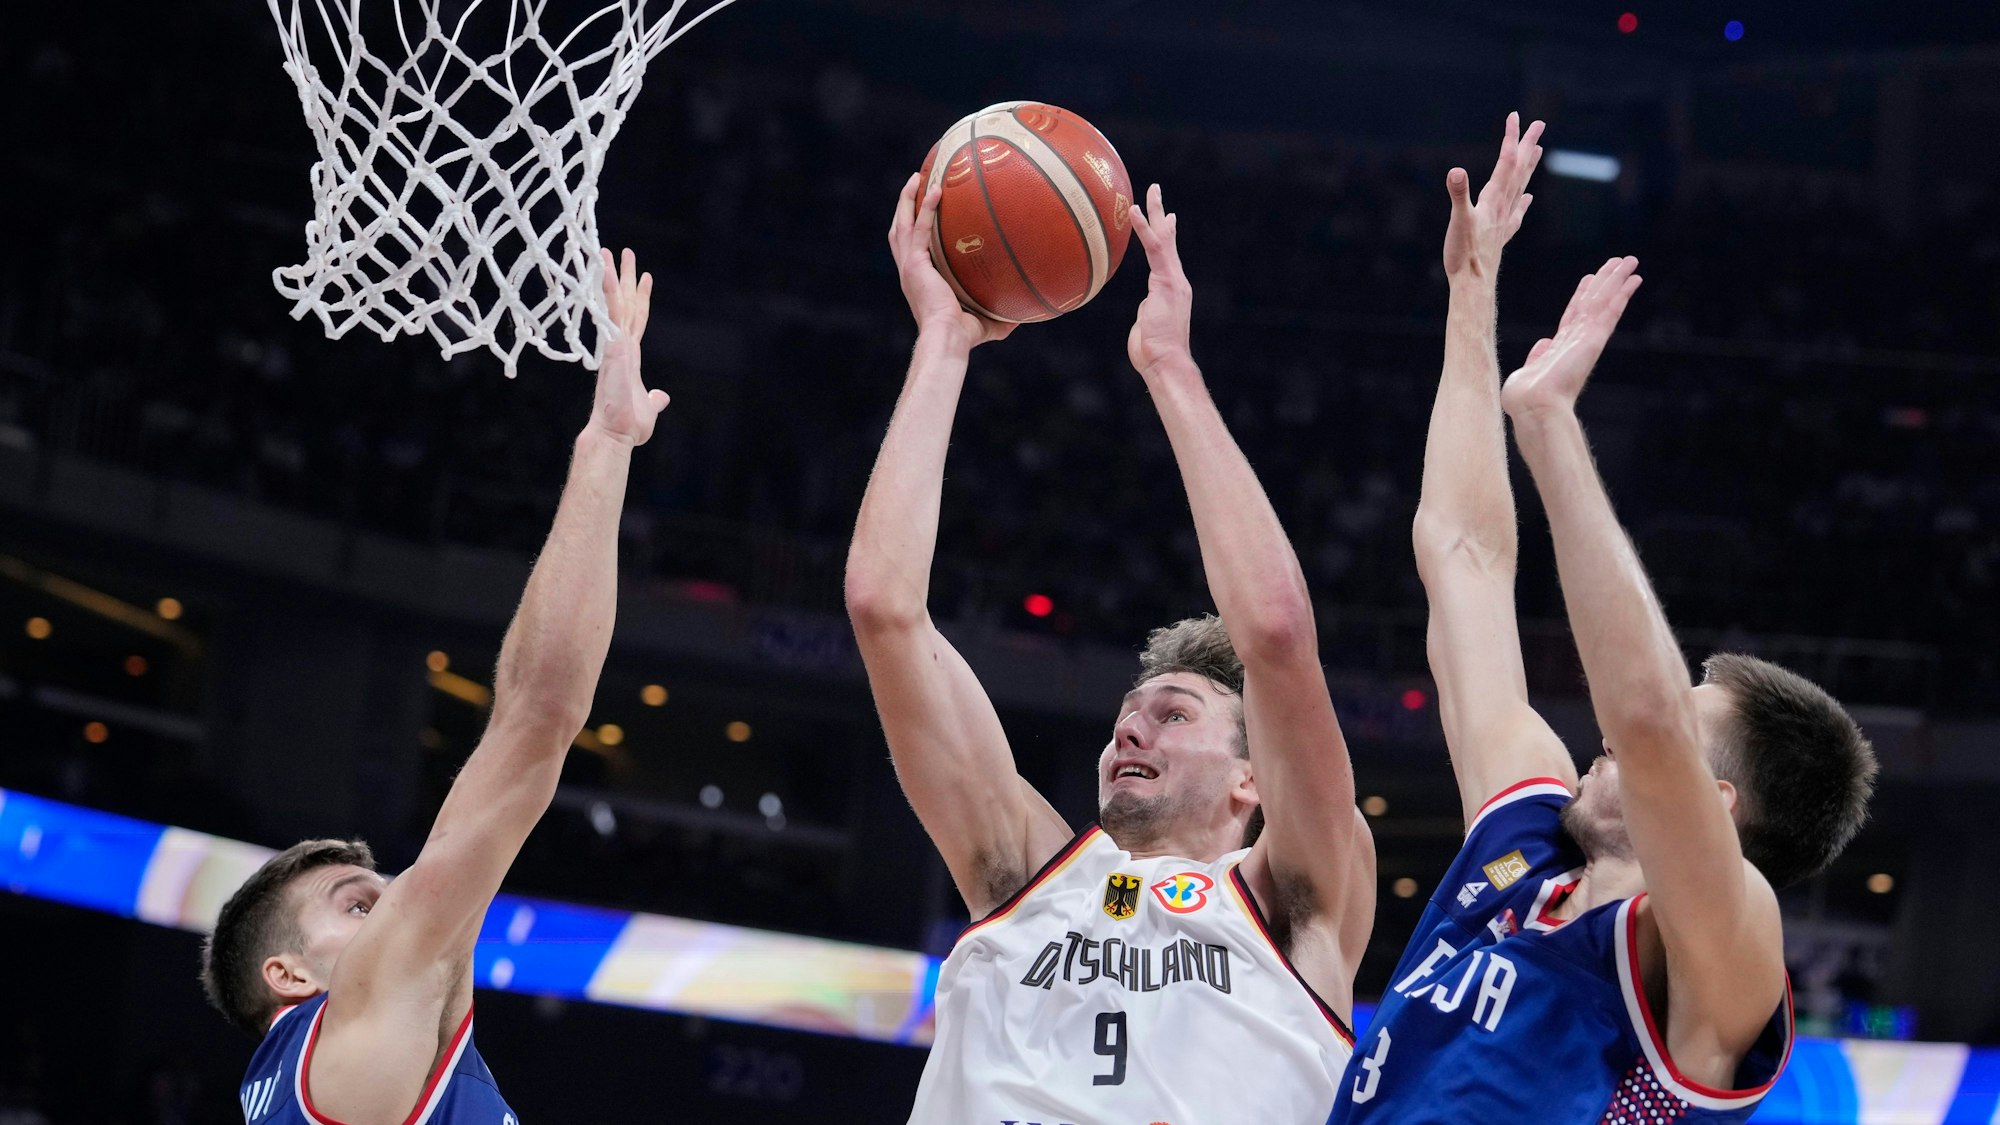 Germany guard Franz Wagner (9) shoots between Serbia guard Bogdan Bogdanovic (7) and Serbia c Filip Petrusev (3) during the championship game of the Basketball World Cup in Manila, Philippines, Sunday, Sept. 10, 2023. (AP Photo/Michael Conroy)